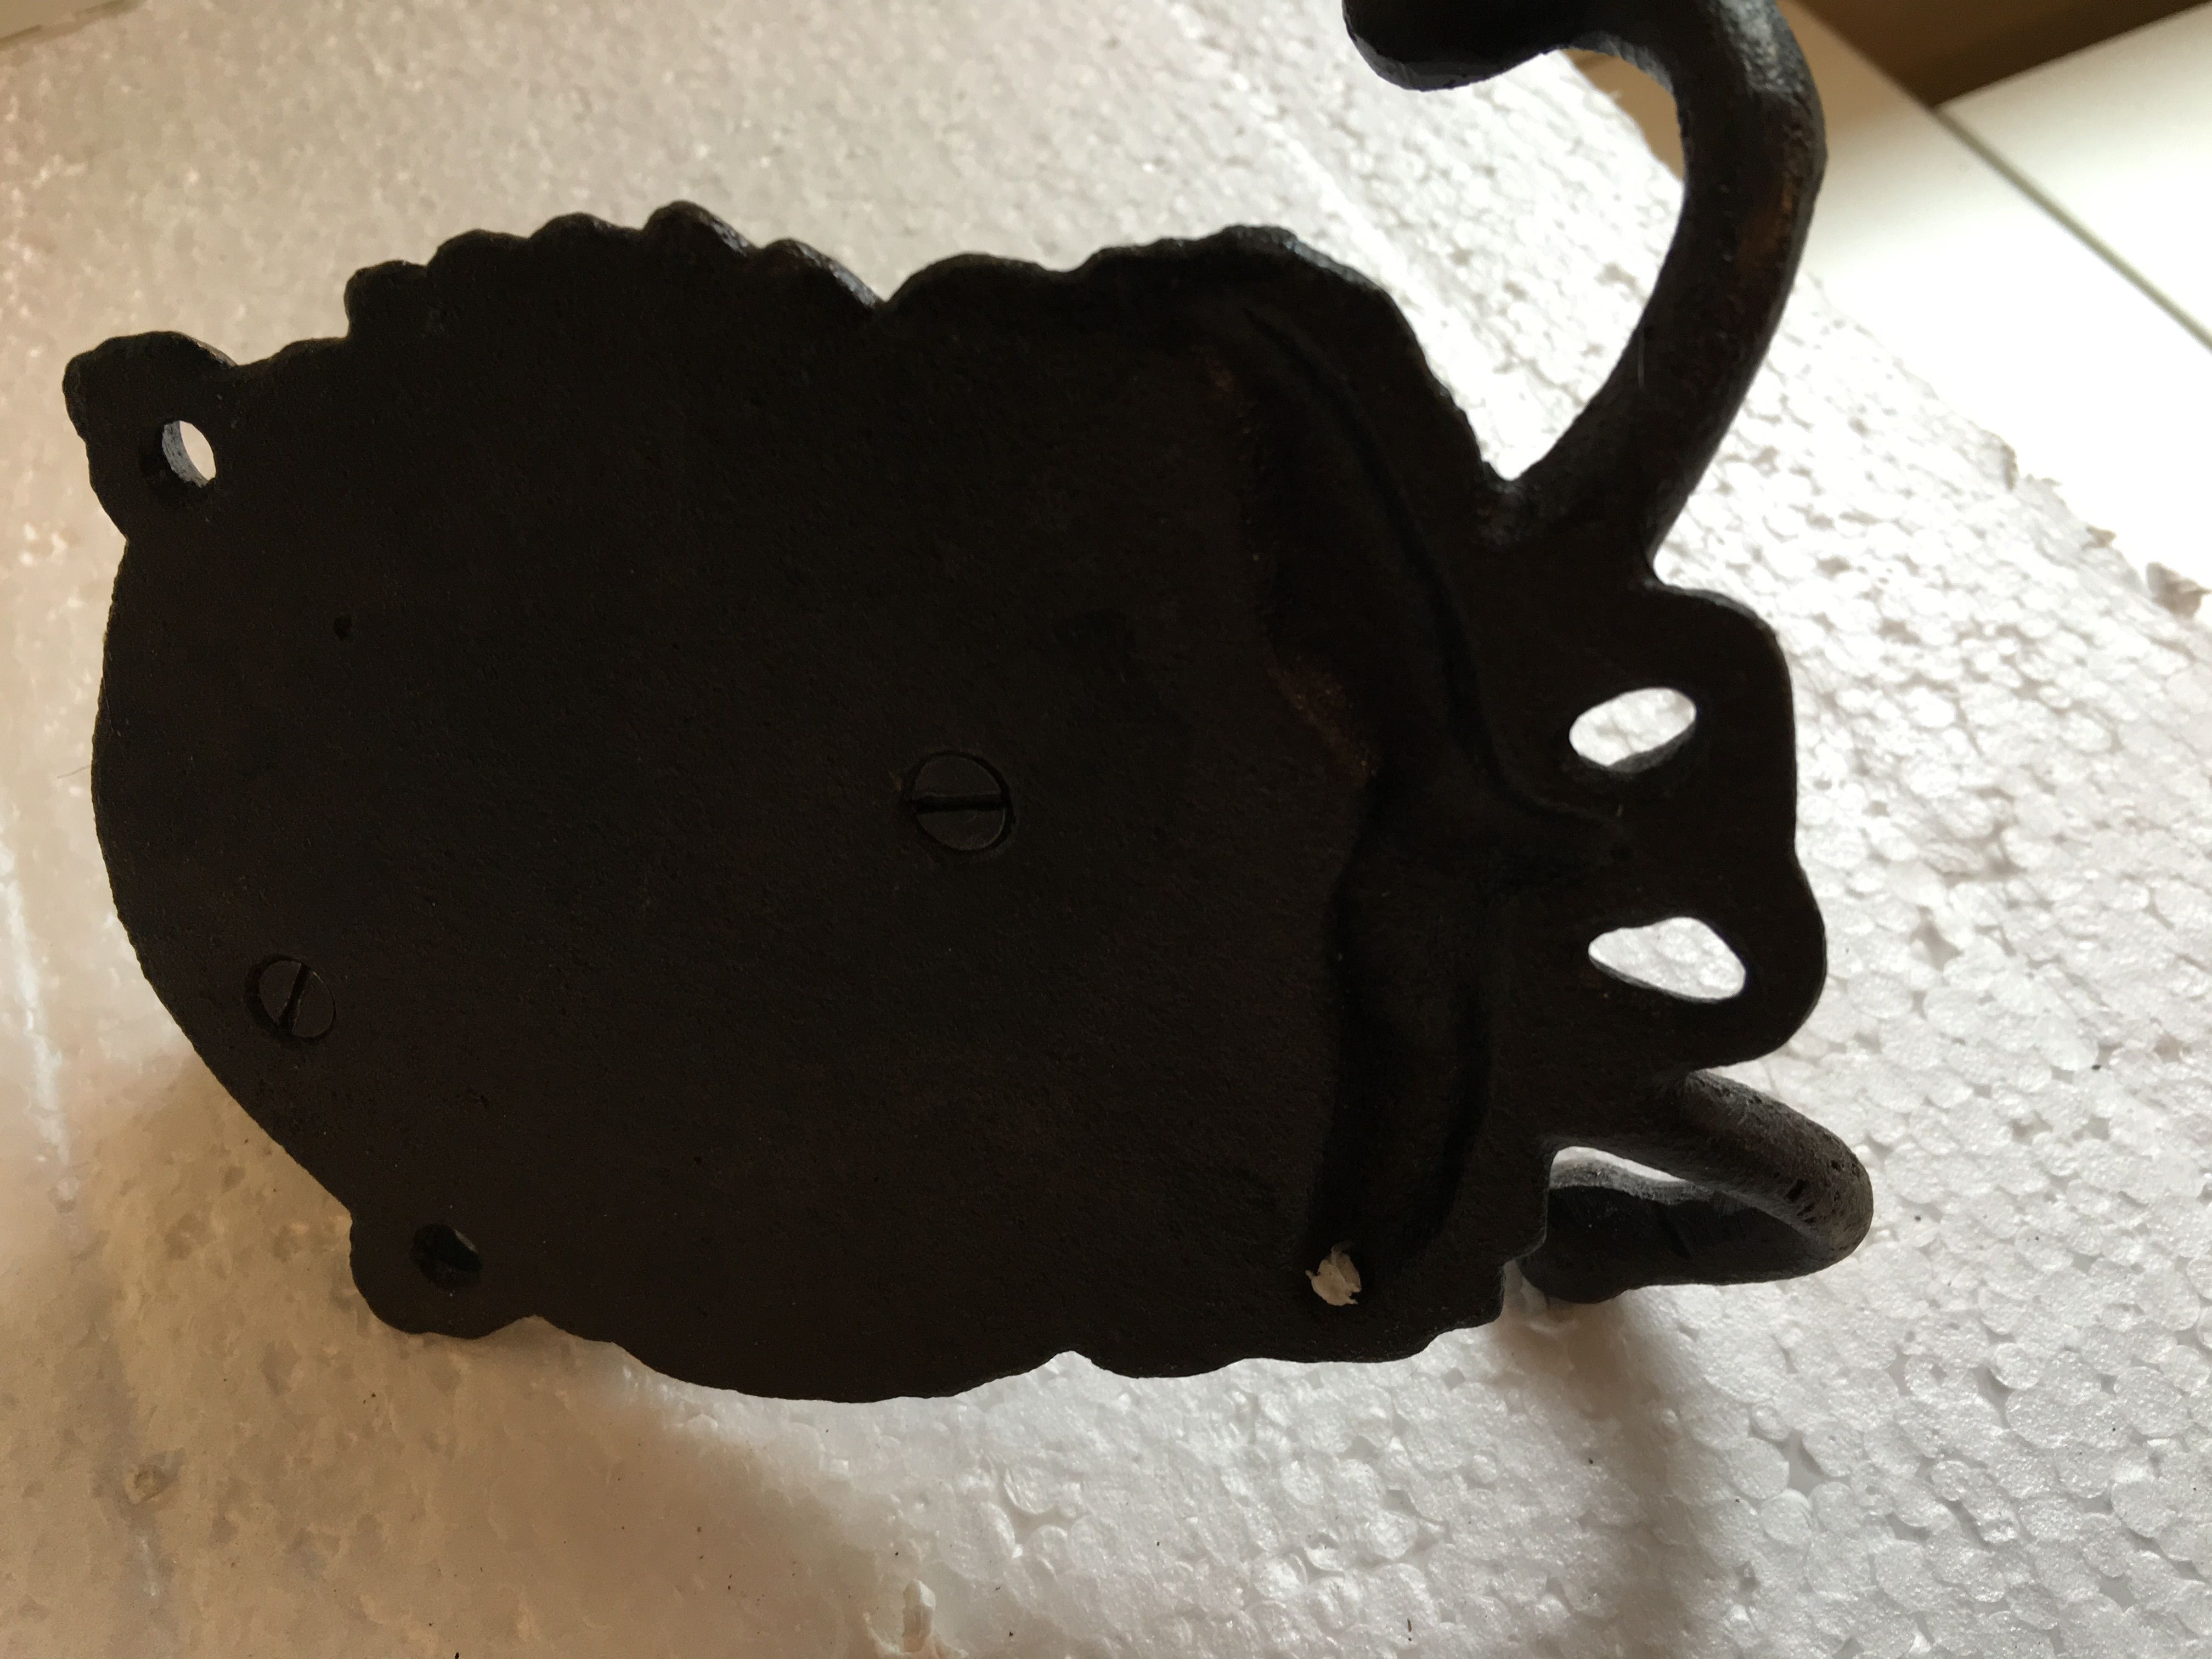 Cast iron-bronze colored horse head with double coat hook